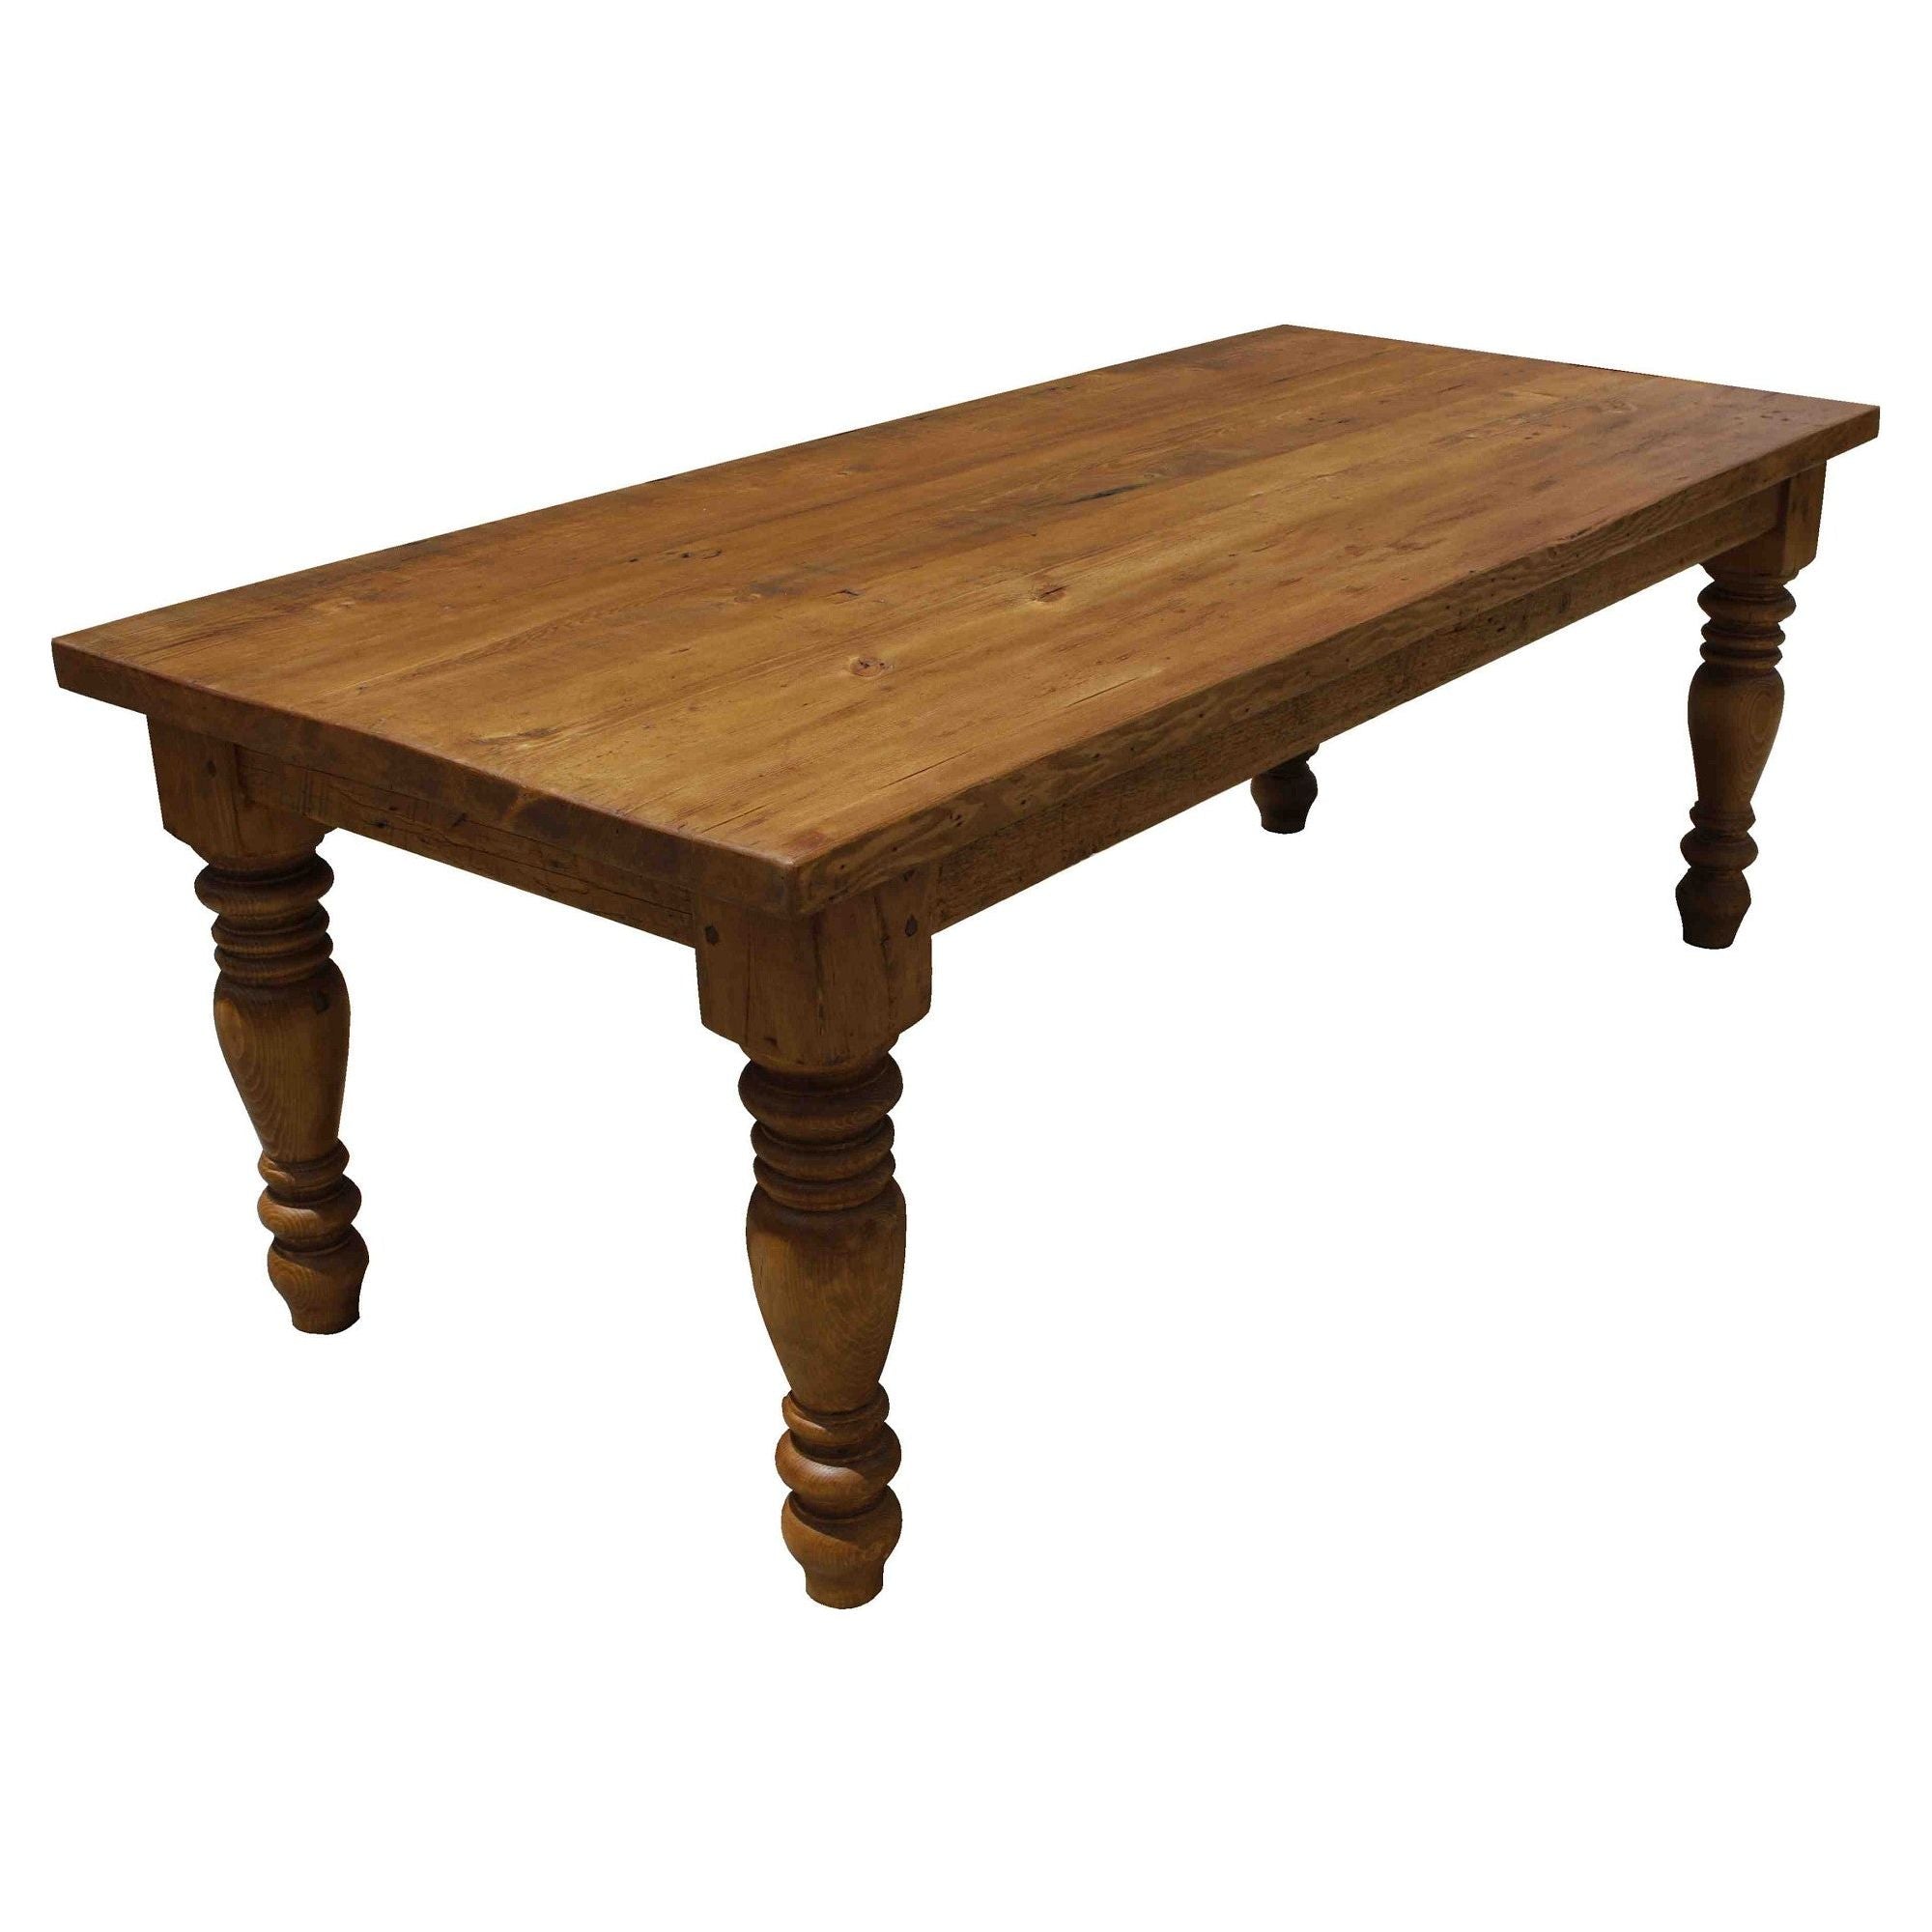 Shop Dining Room Table With Turned Table Legs